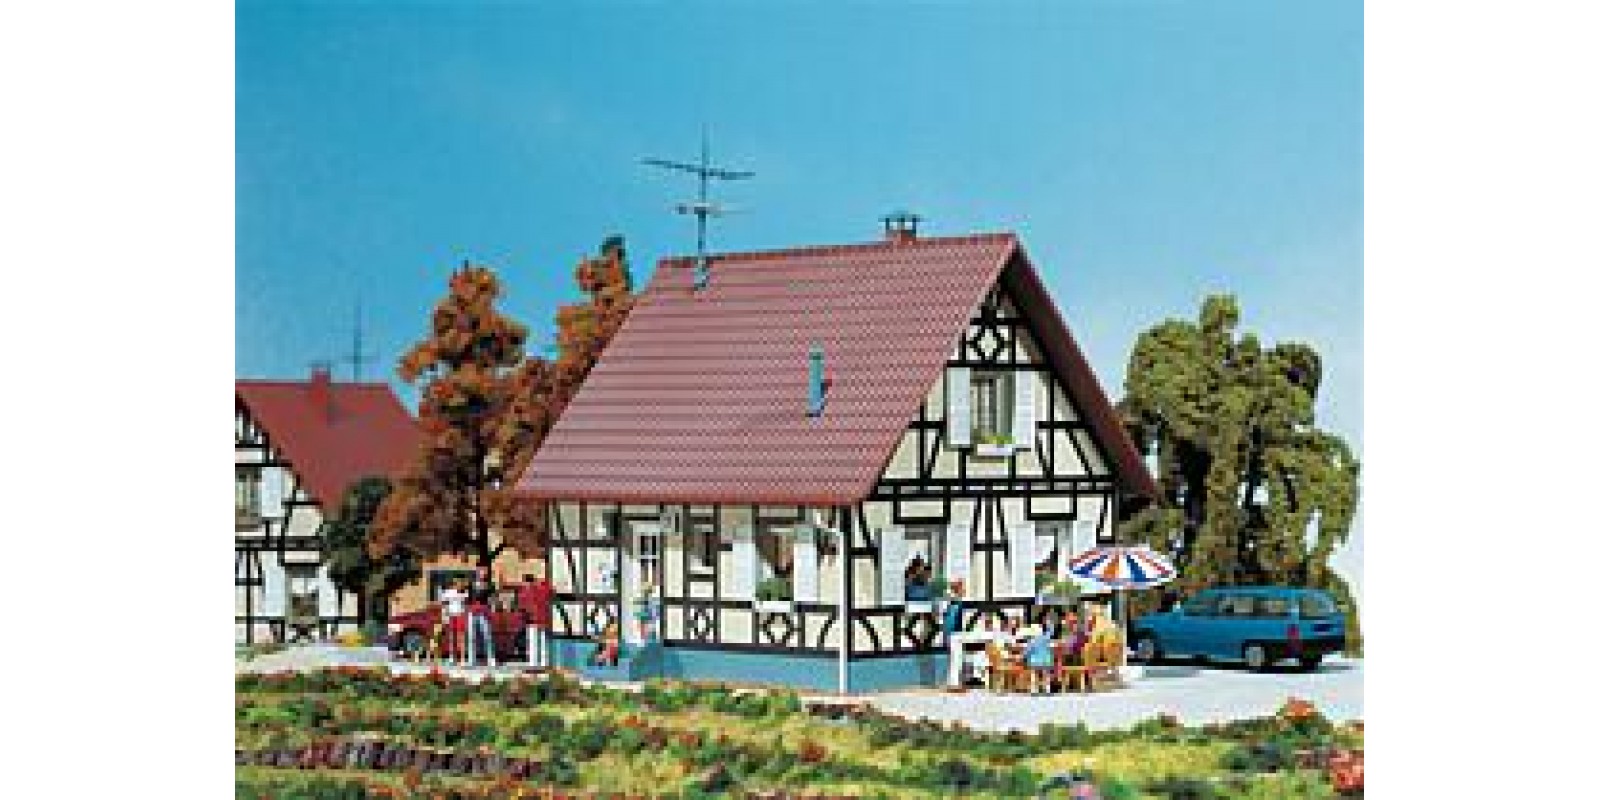 FA130221 Half-timbered one-family house